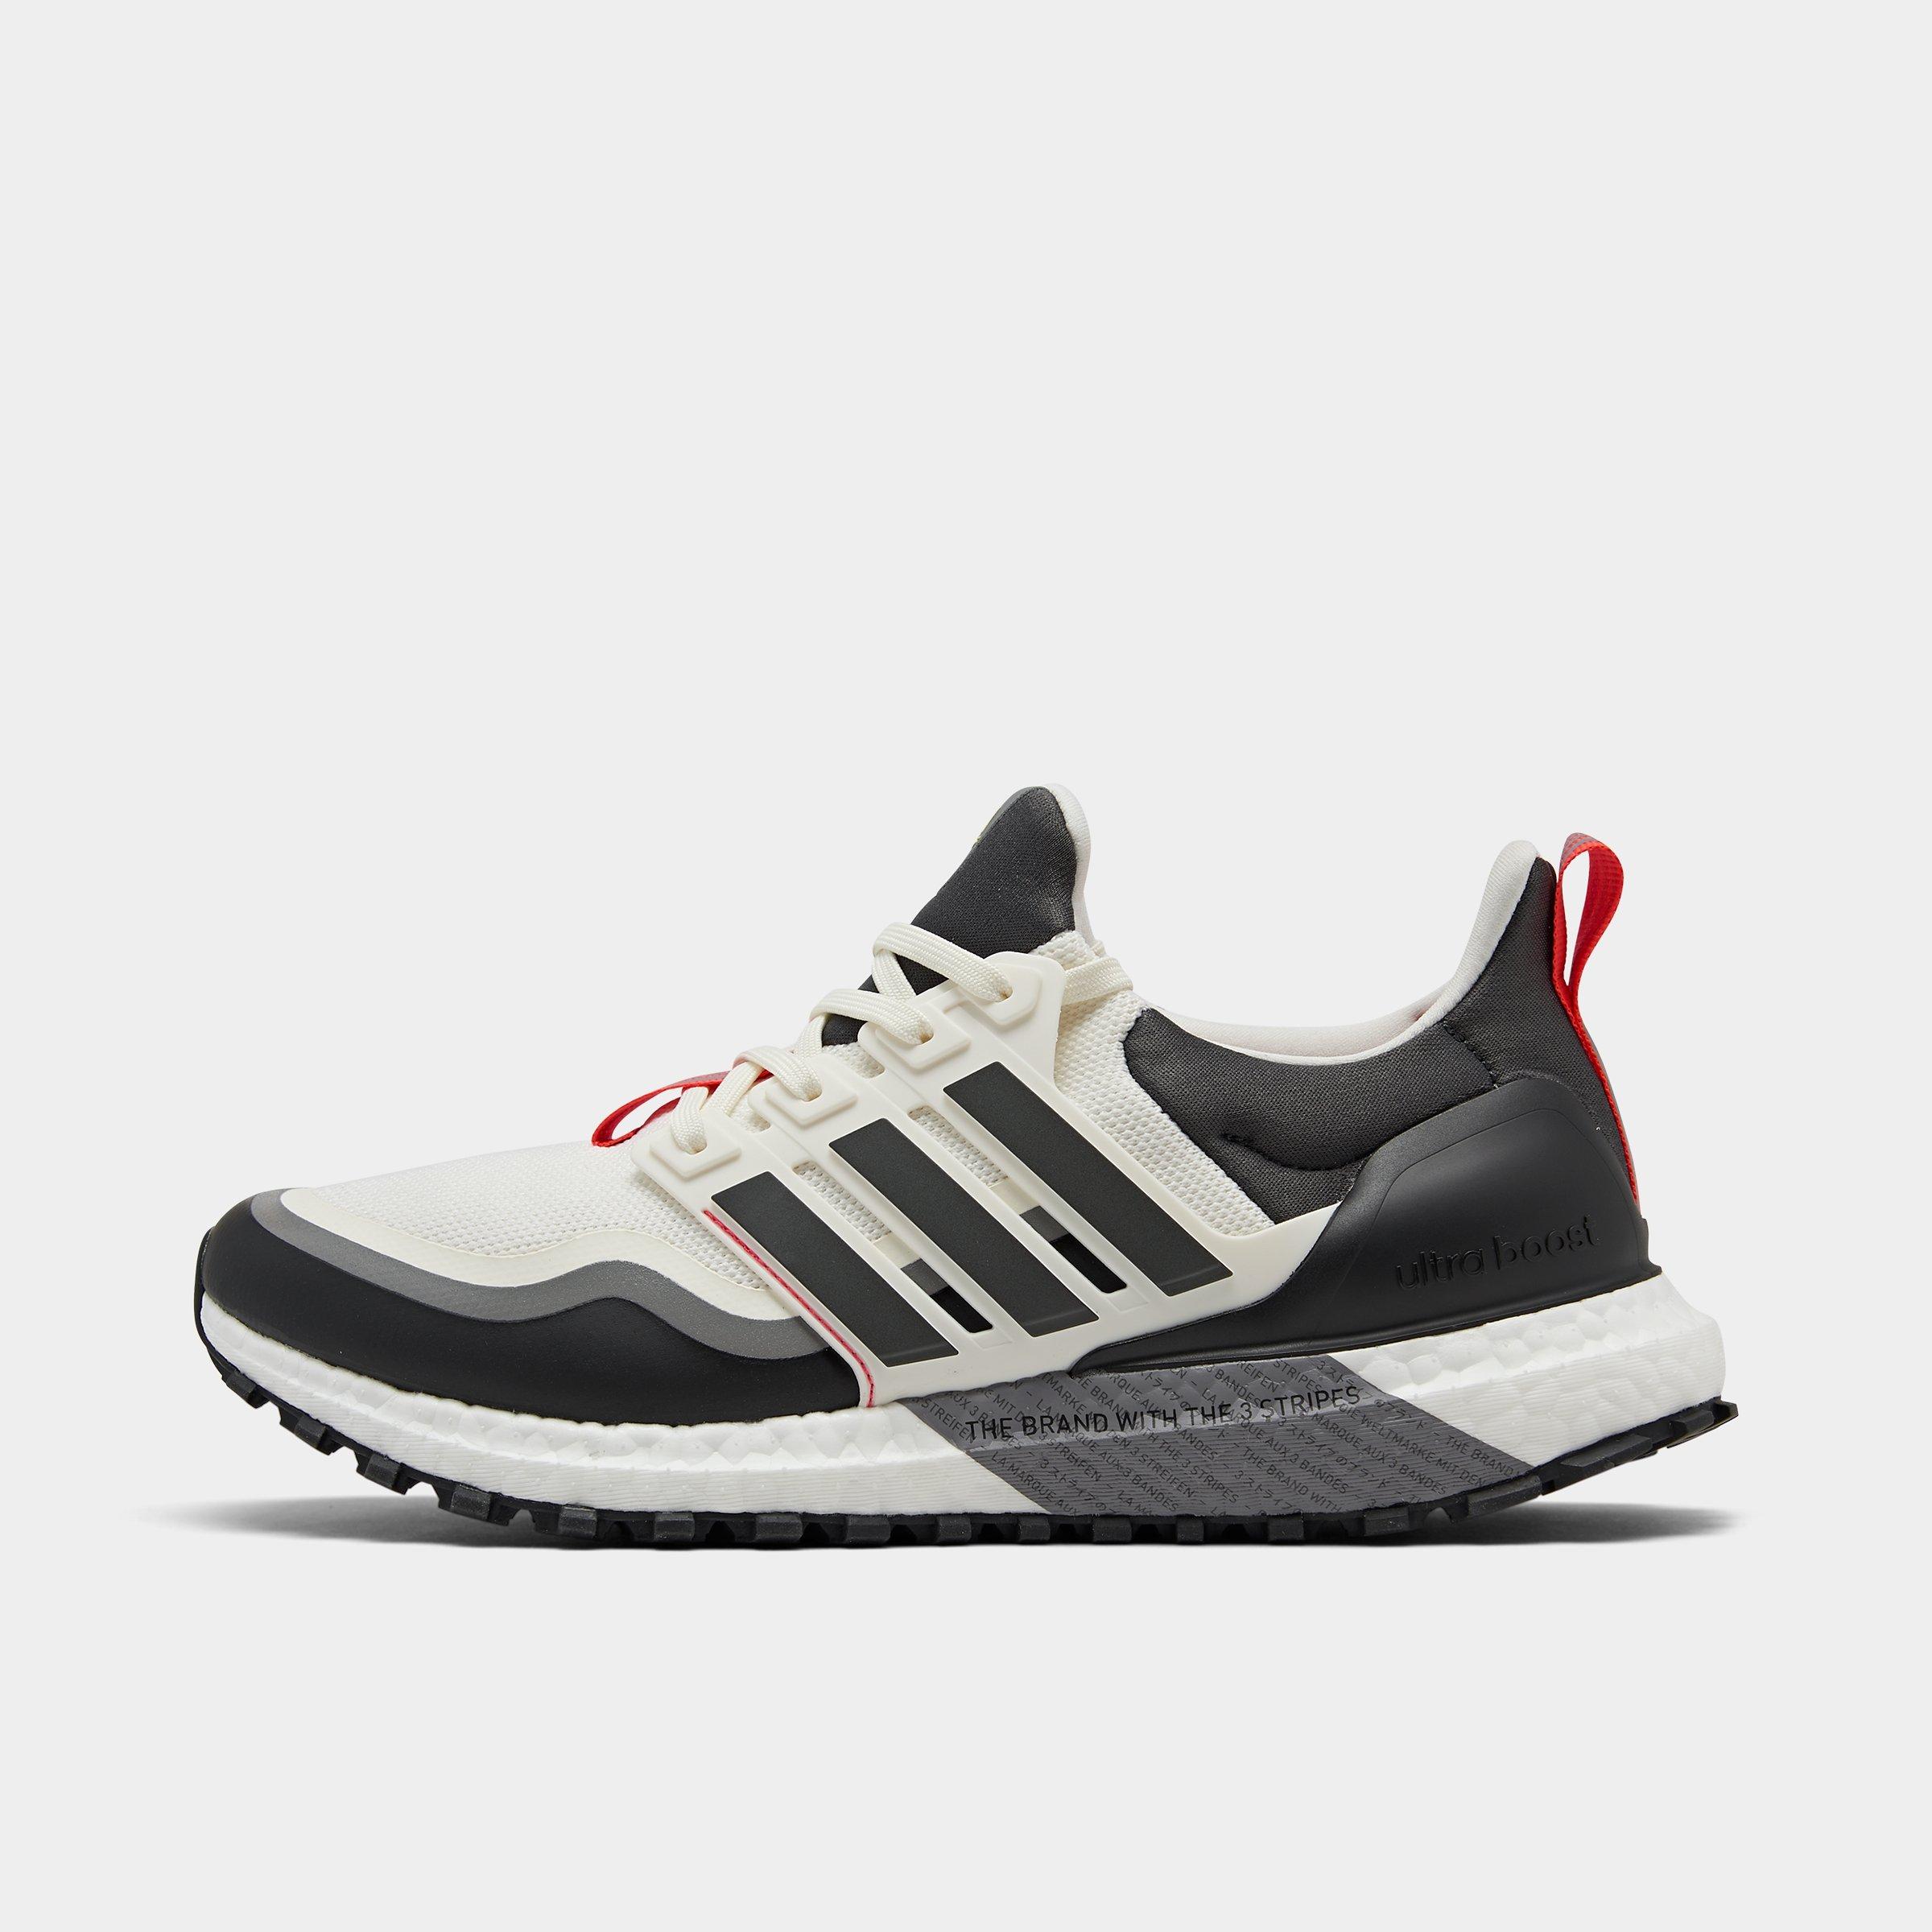 adidas extra wide running shoes